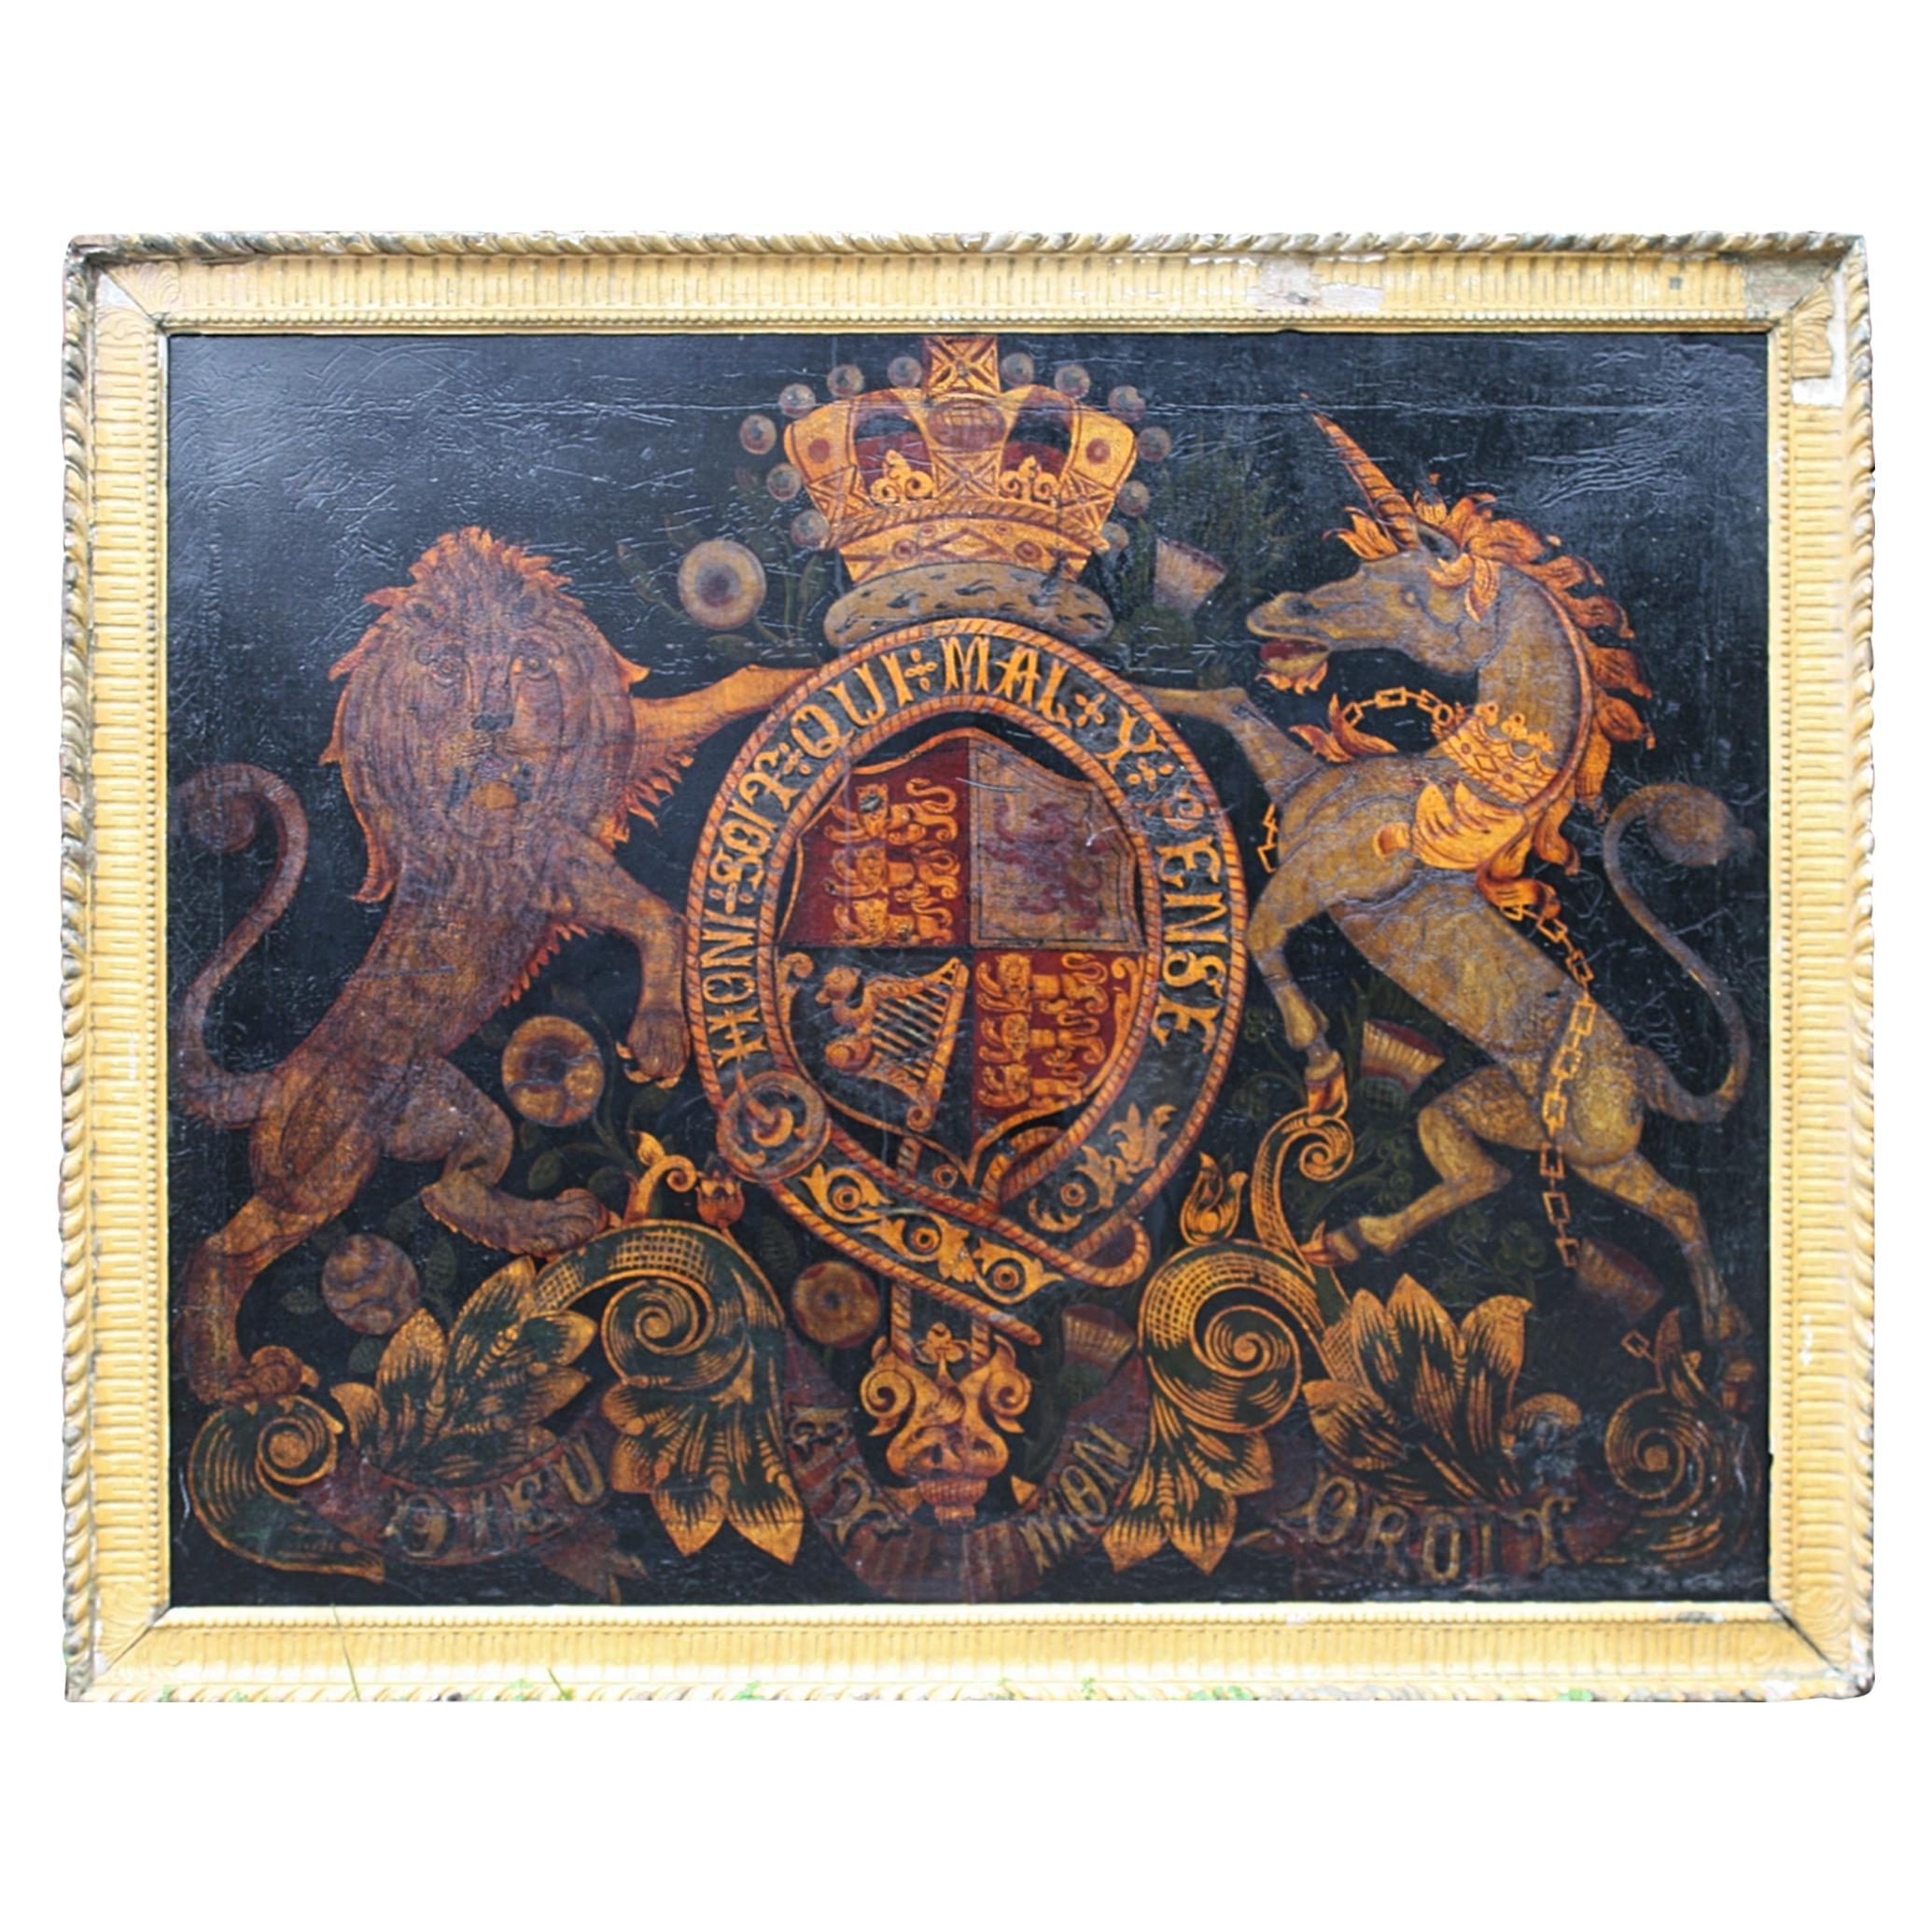 Early Victorian 19th Century Painted Royal Coat of Arms Armorial